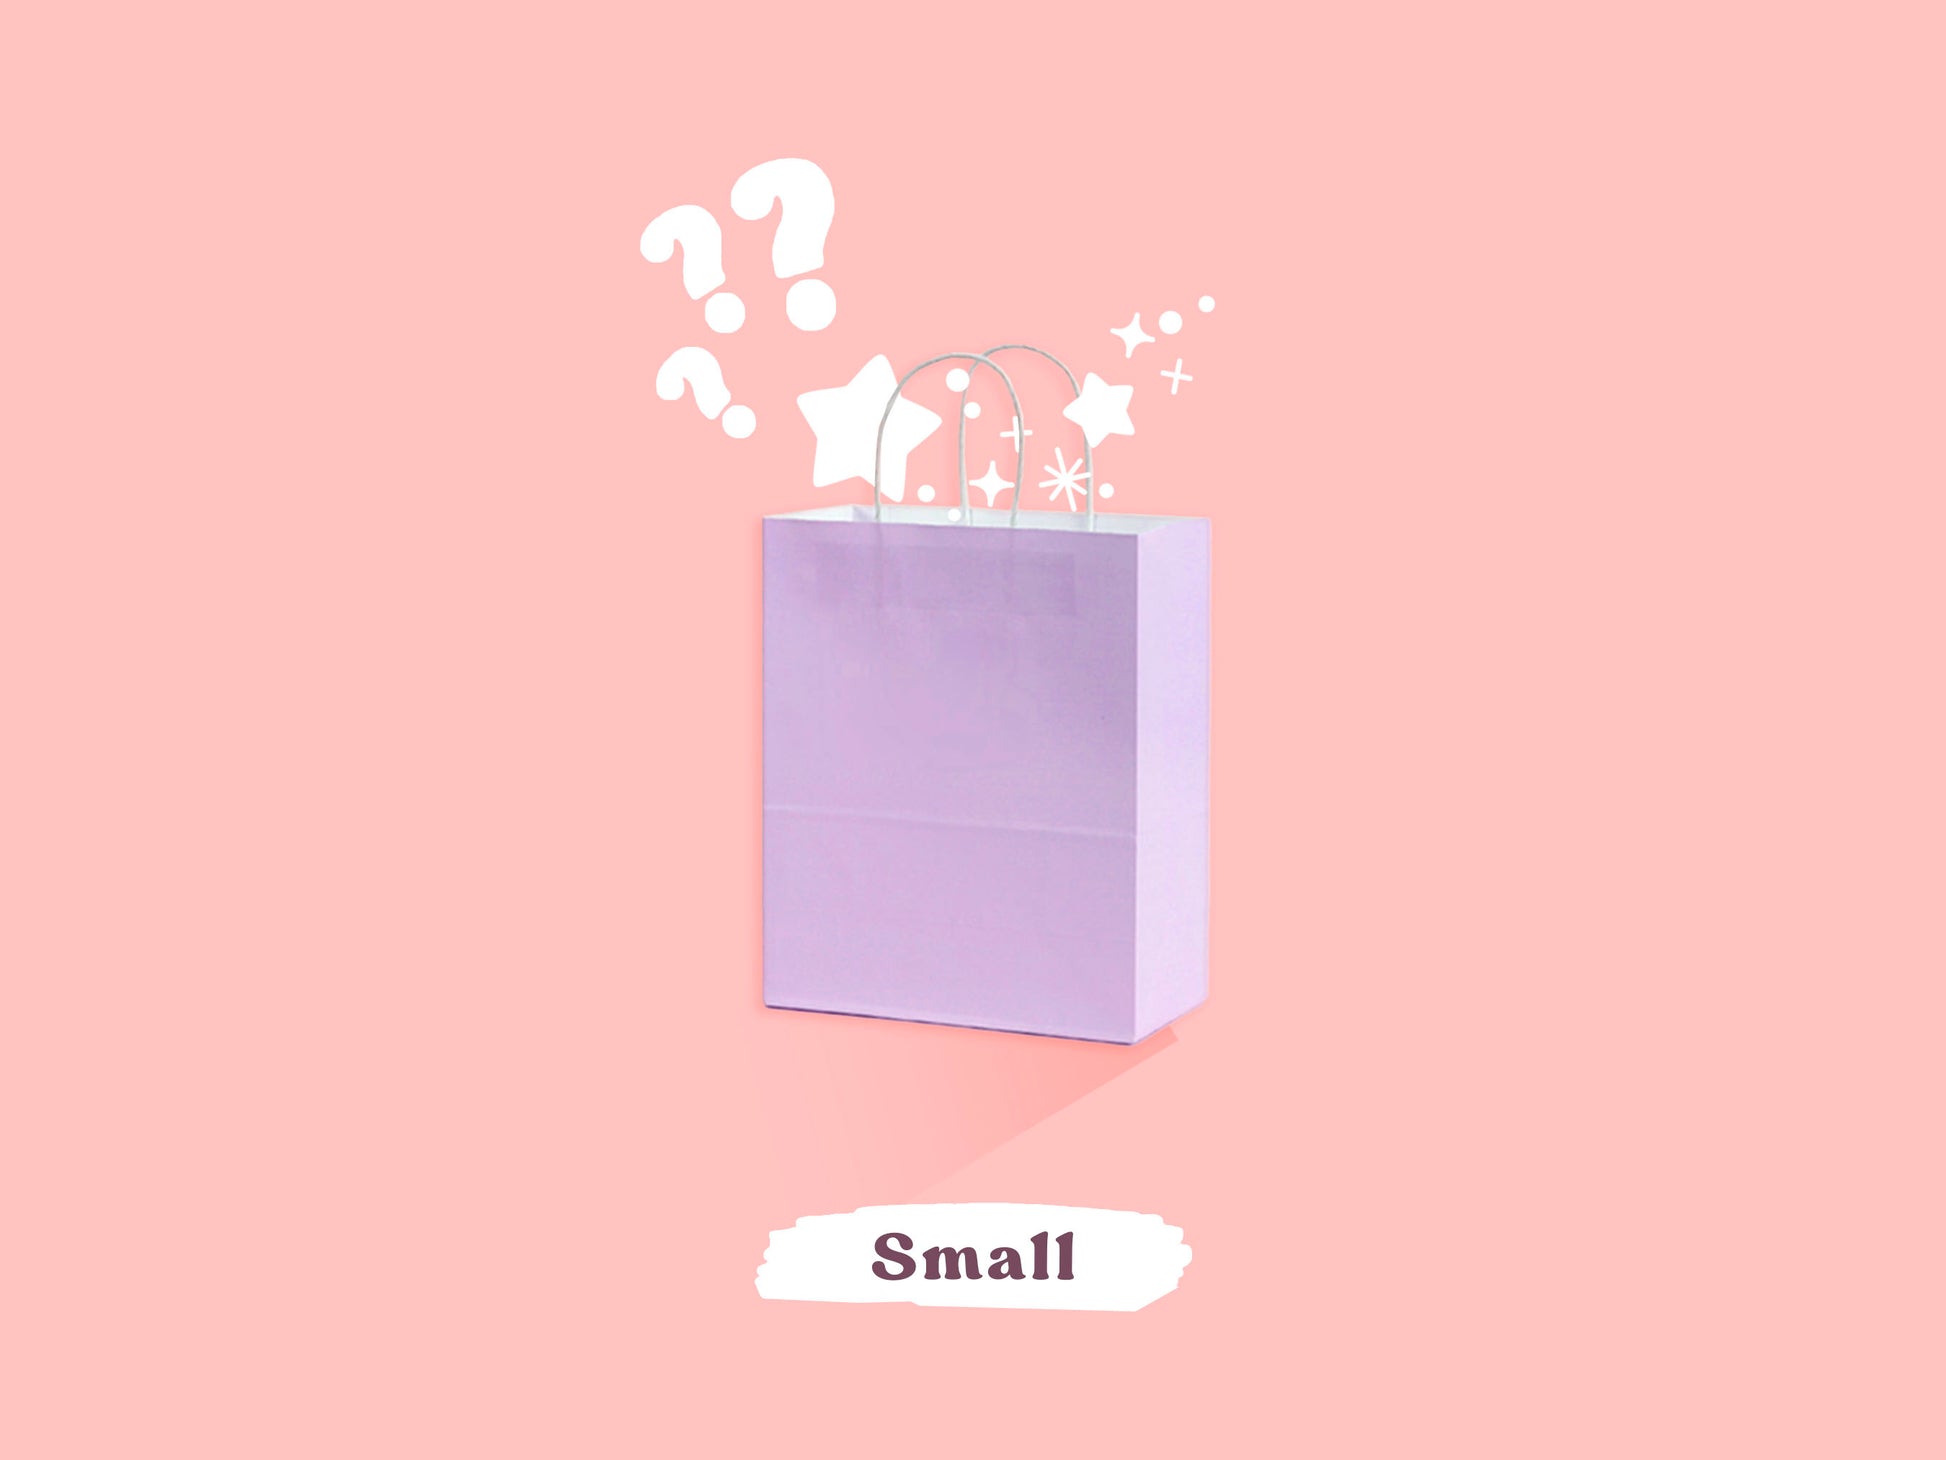 A pastel purple paper mystery bag open with cartoon stars falling out of it, surrounded by the word Small